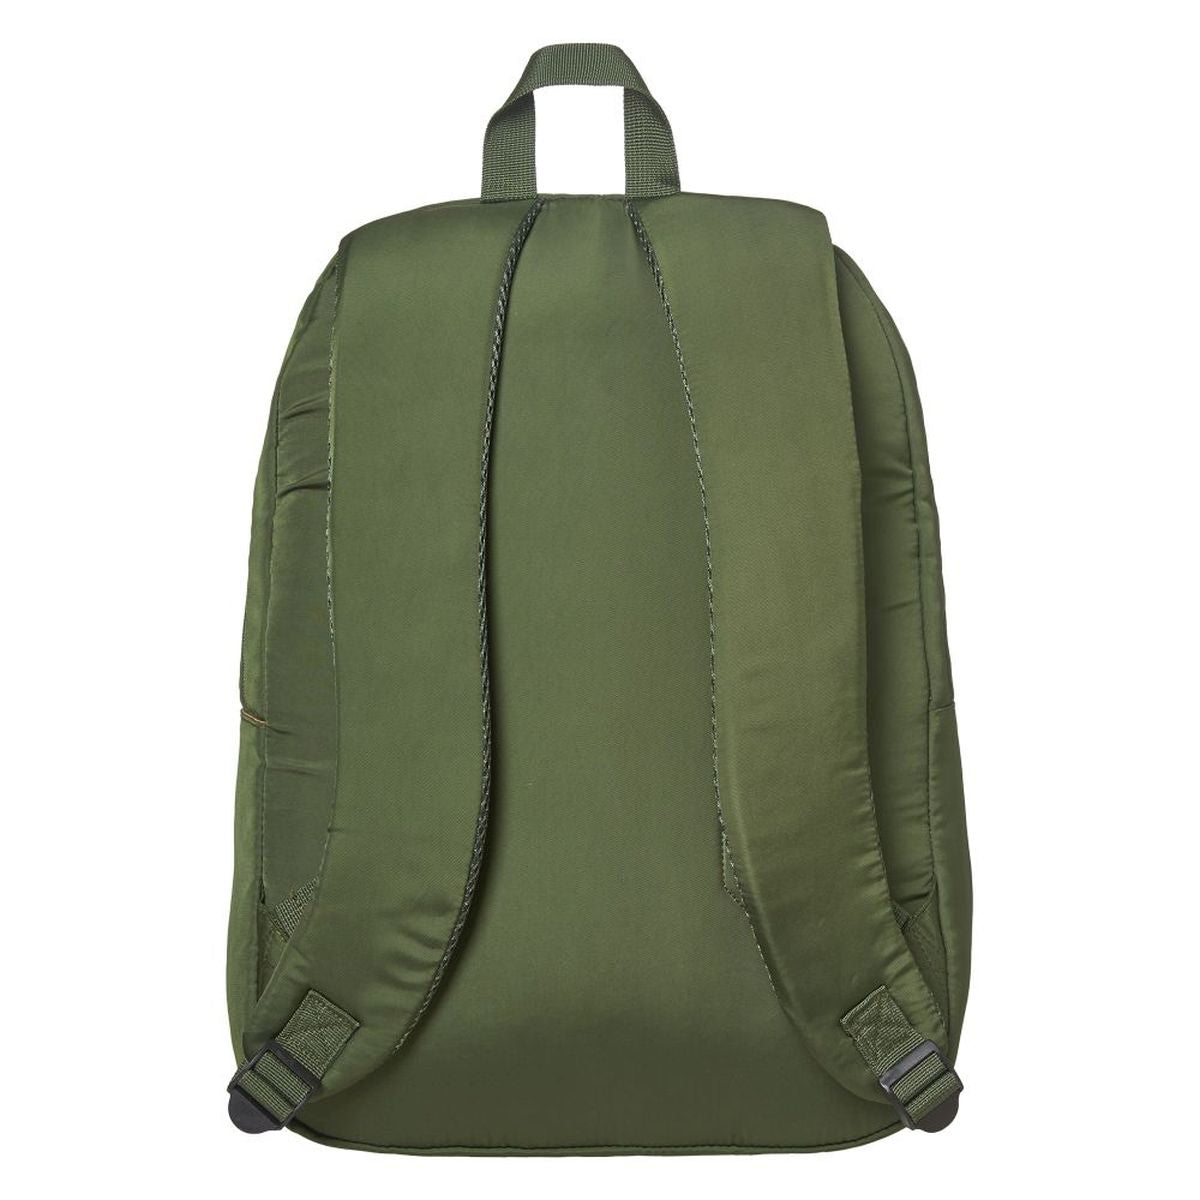 Backpack Poitou Trends Seaweed